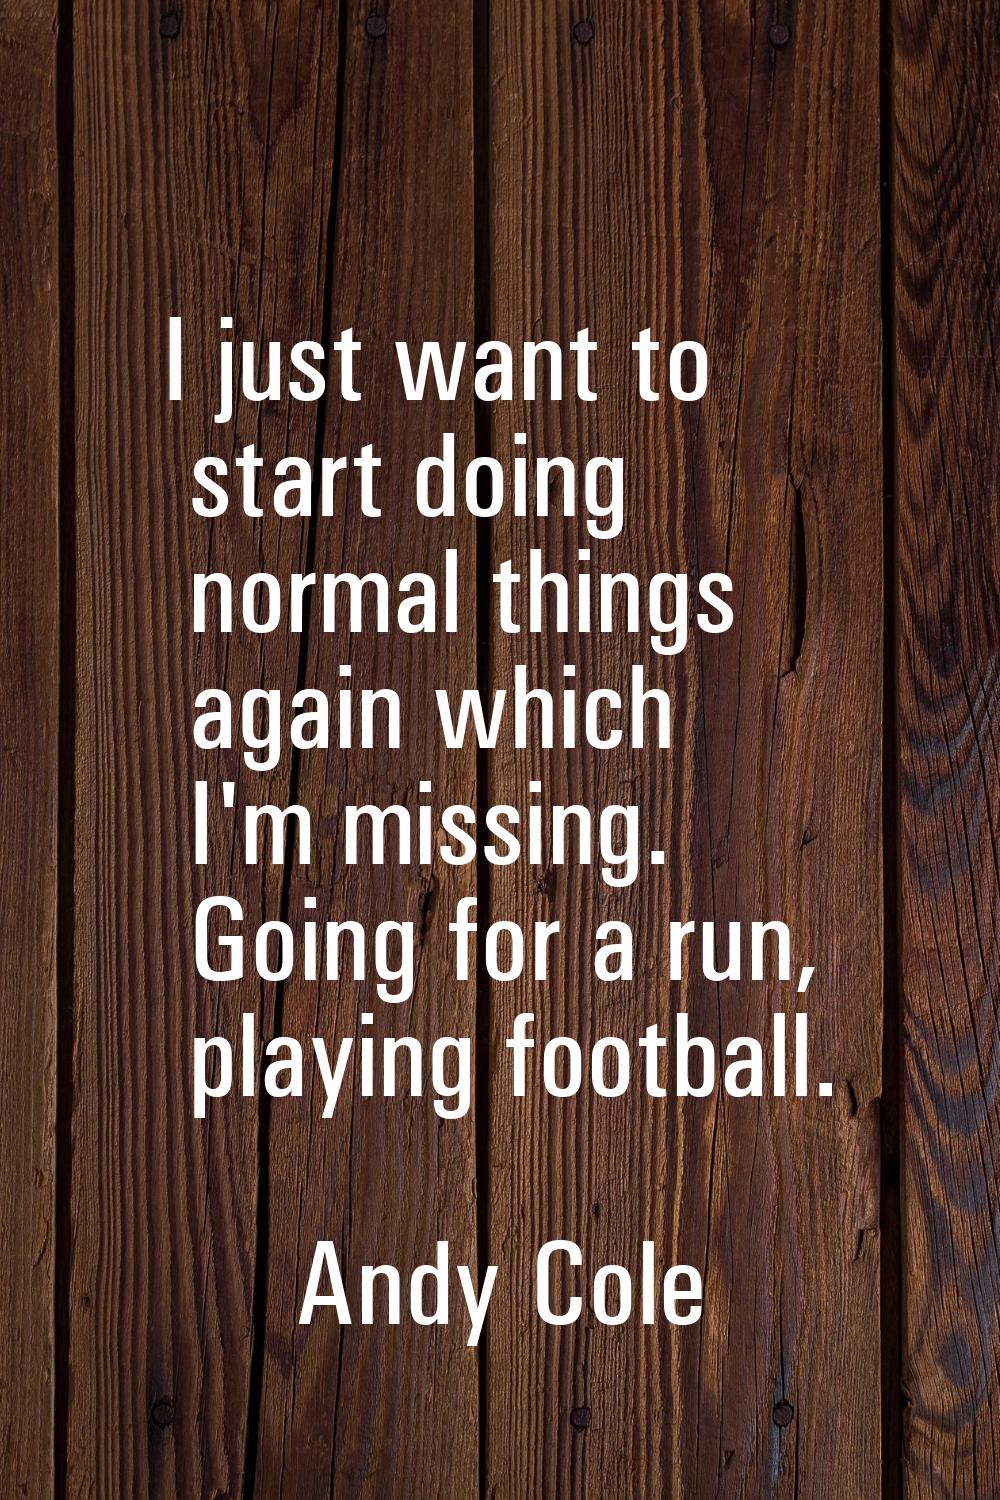 I just want to start doing normal things again which I'm missing. Going for a run, playing football